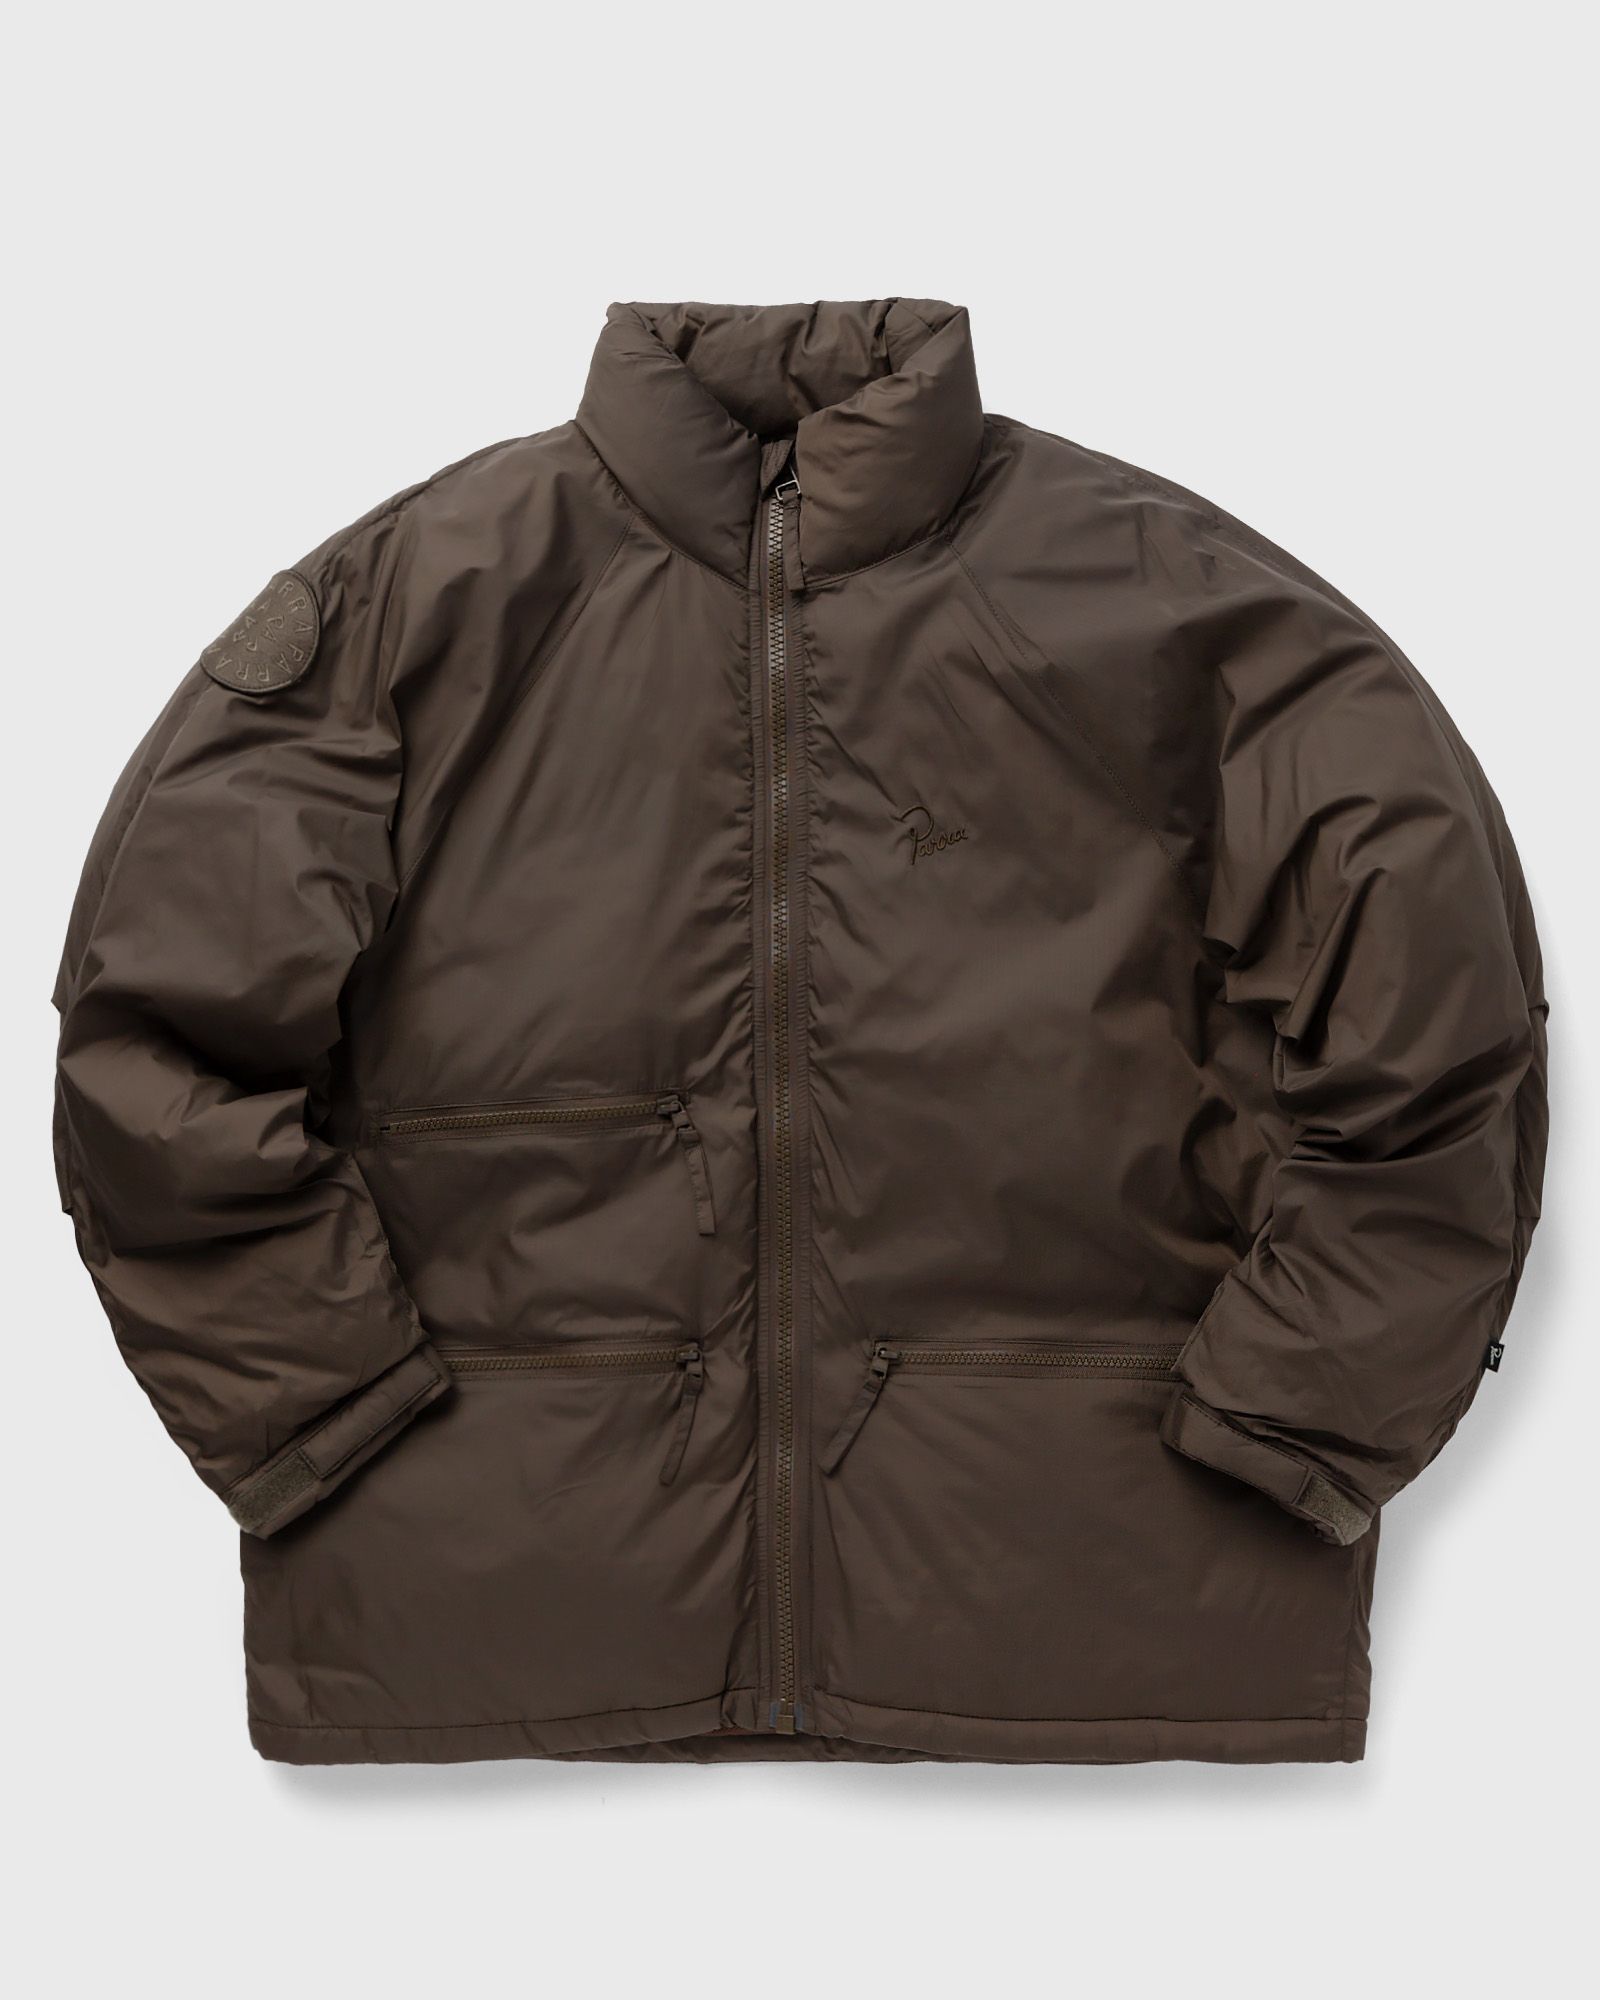 By Parra - canyons all over jacket men down & puffer jackets brown in größe:l